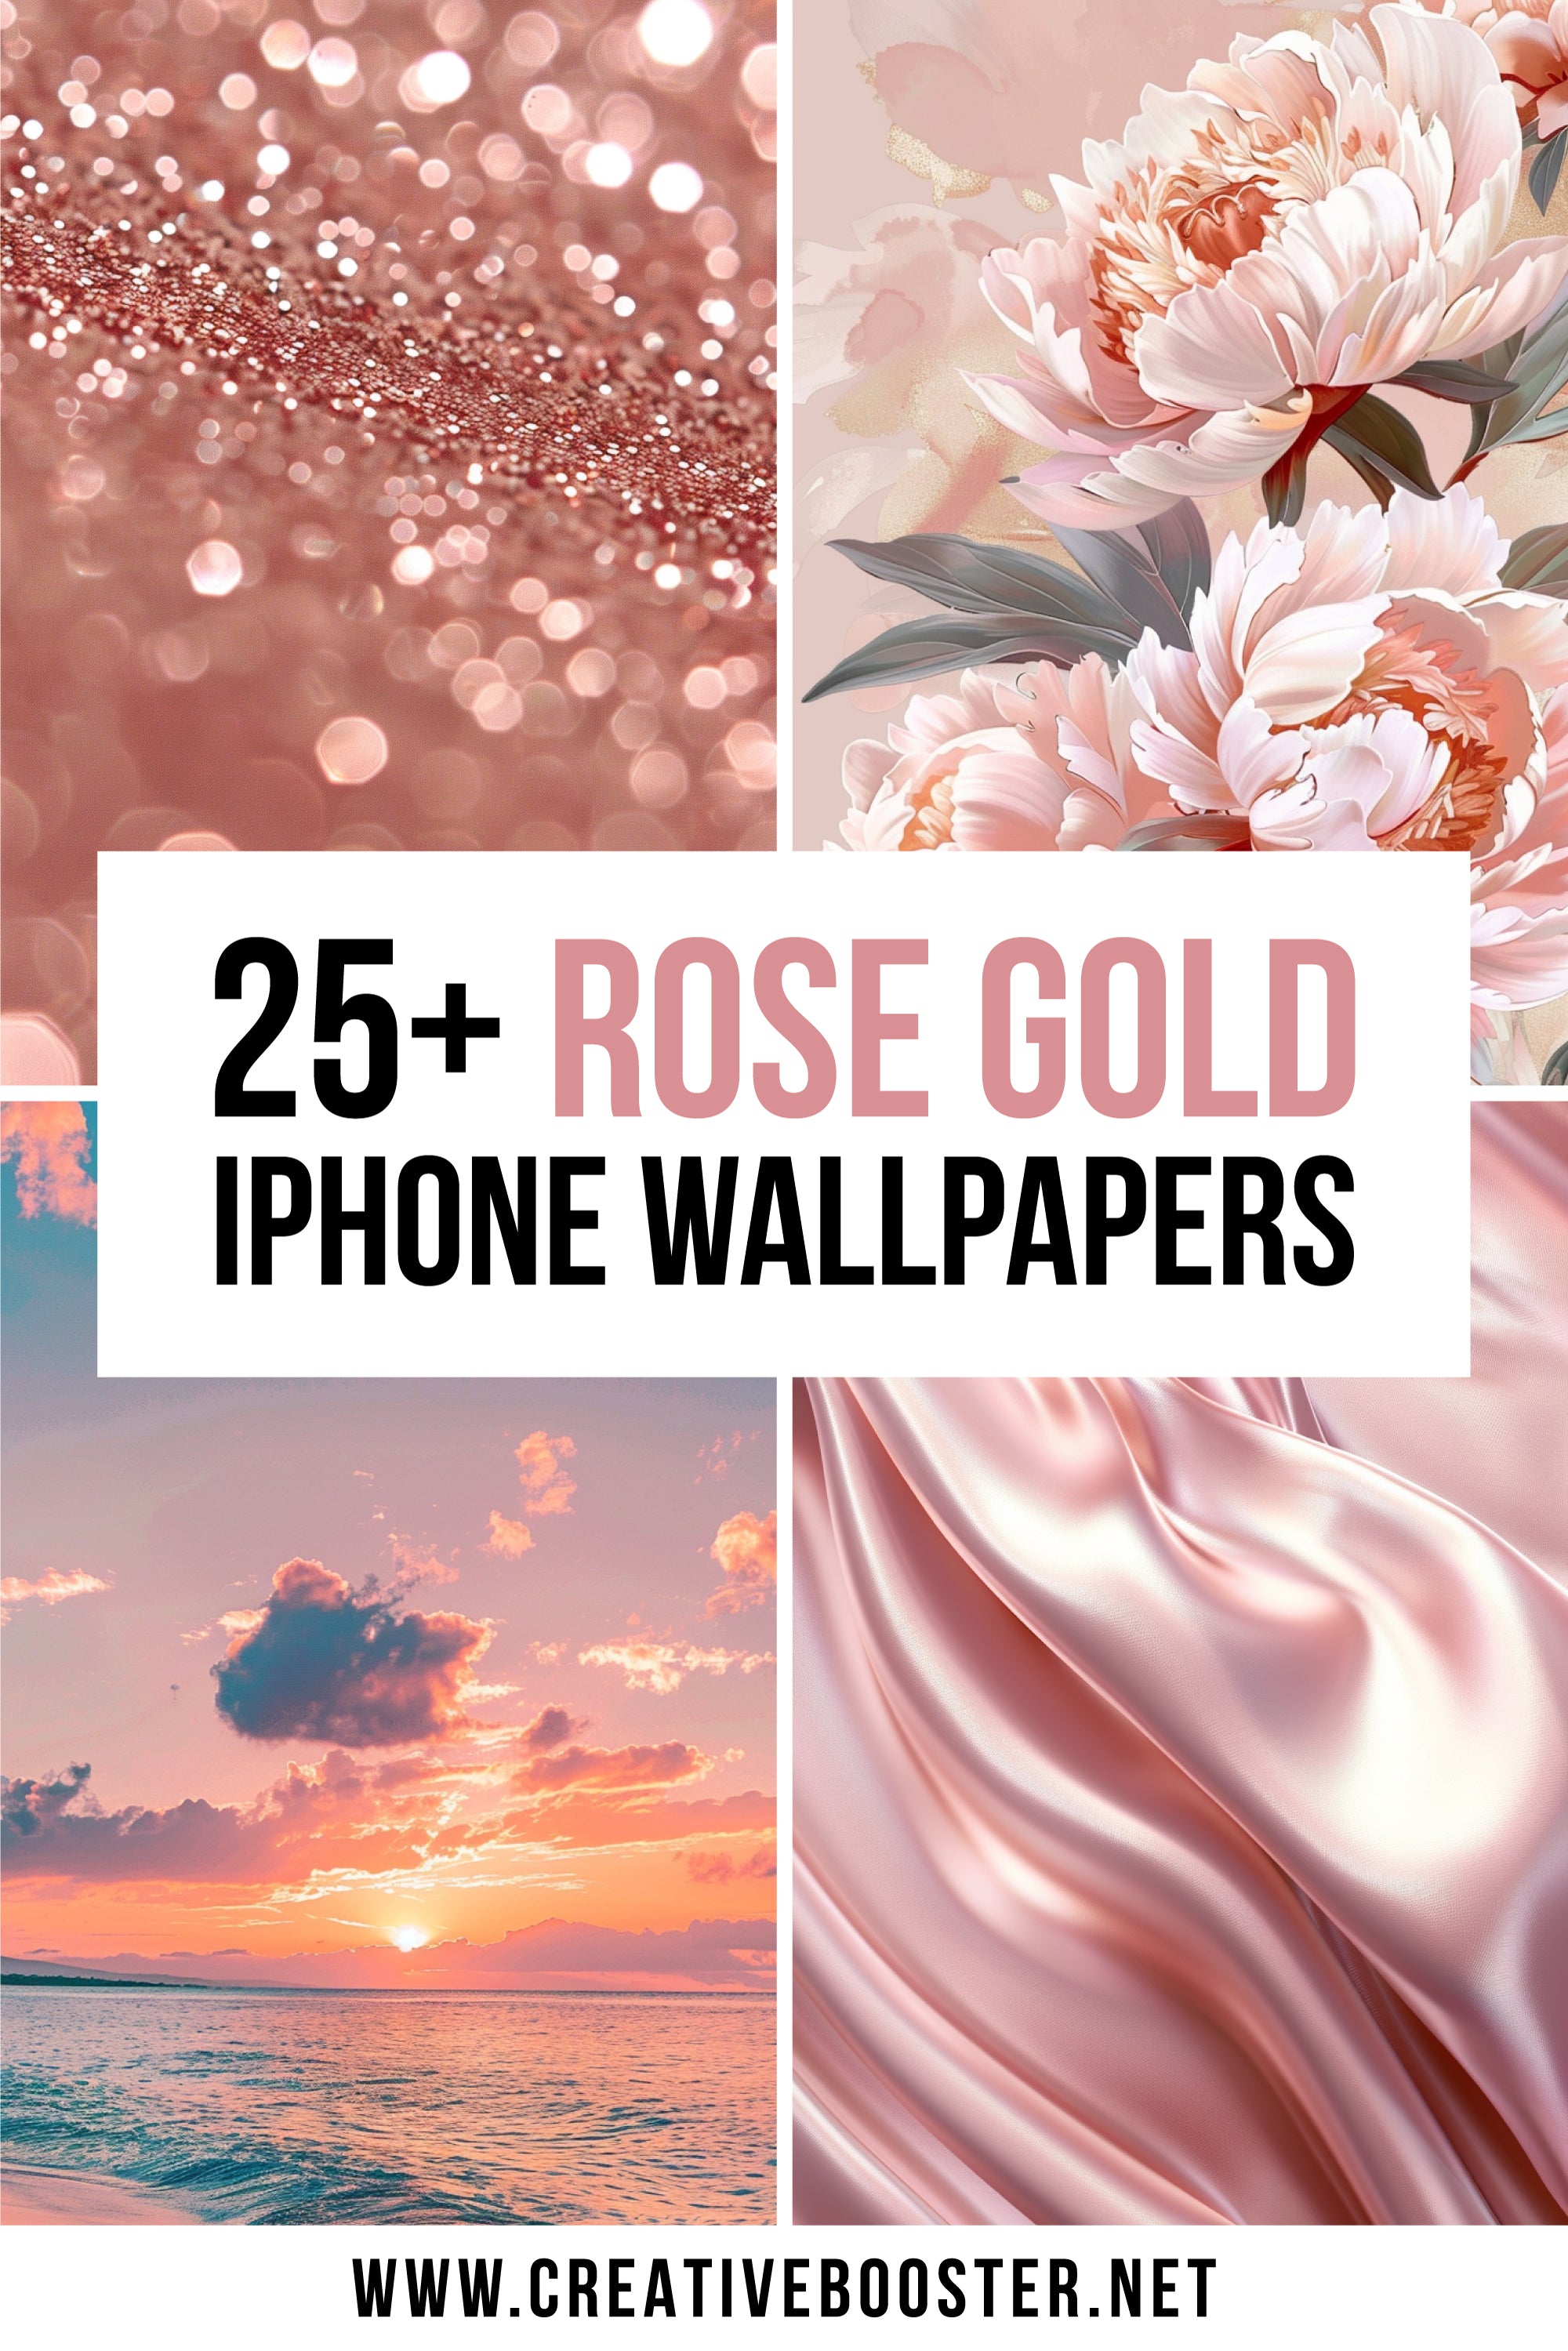 Best-Aesthetic-Rose-Gold-iPhone-Wallpapers-Free-4k-HD-Download-Pinterest-Tall